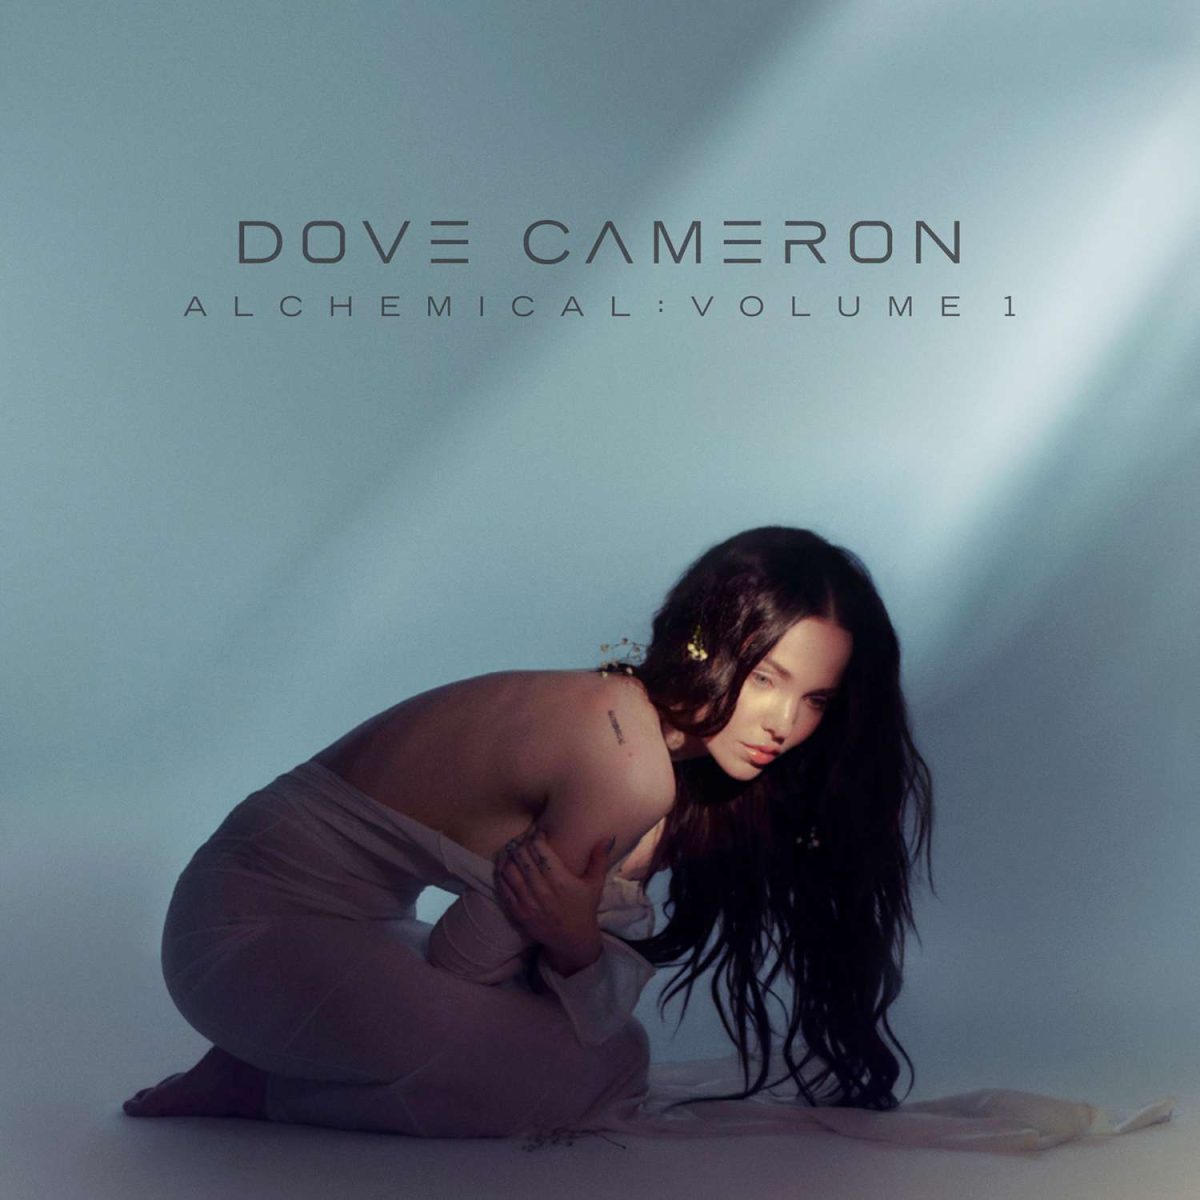 With her new album “Alchemical: Volume 1”, Dove Cameron shares her experiences and growth. 
